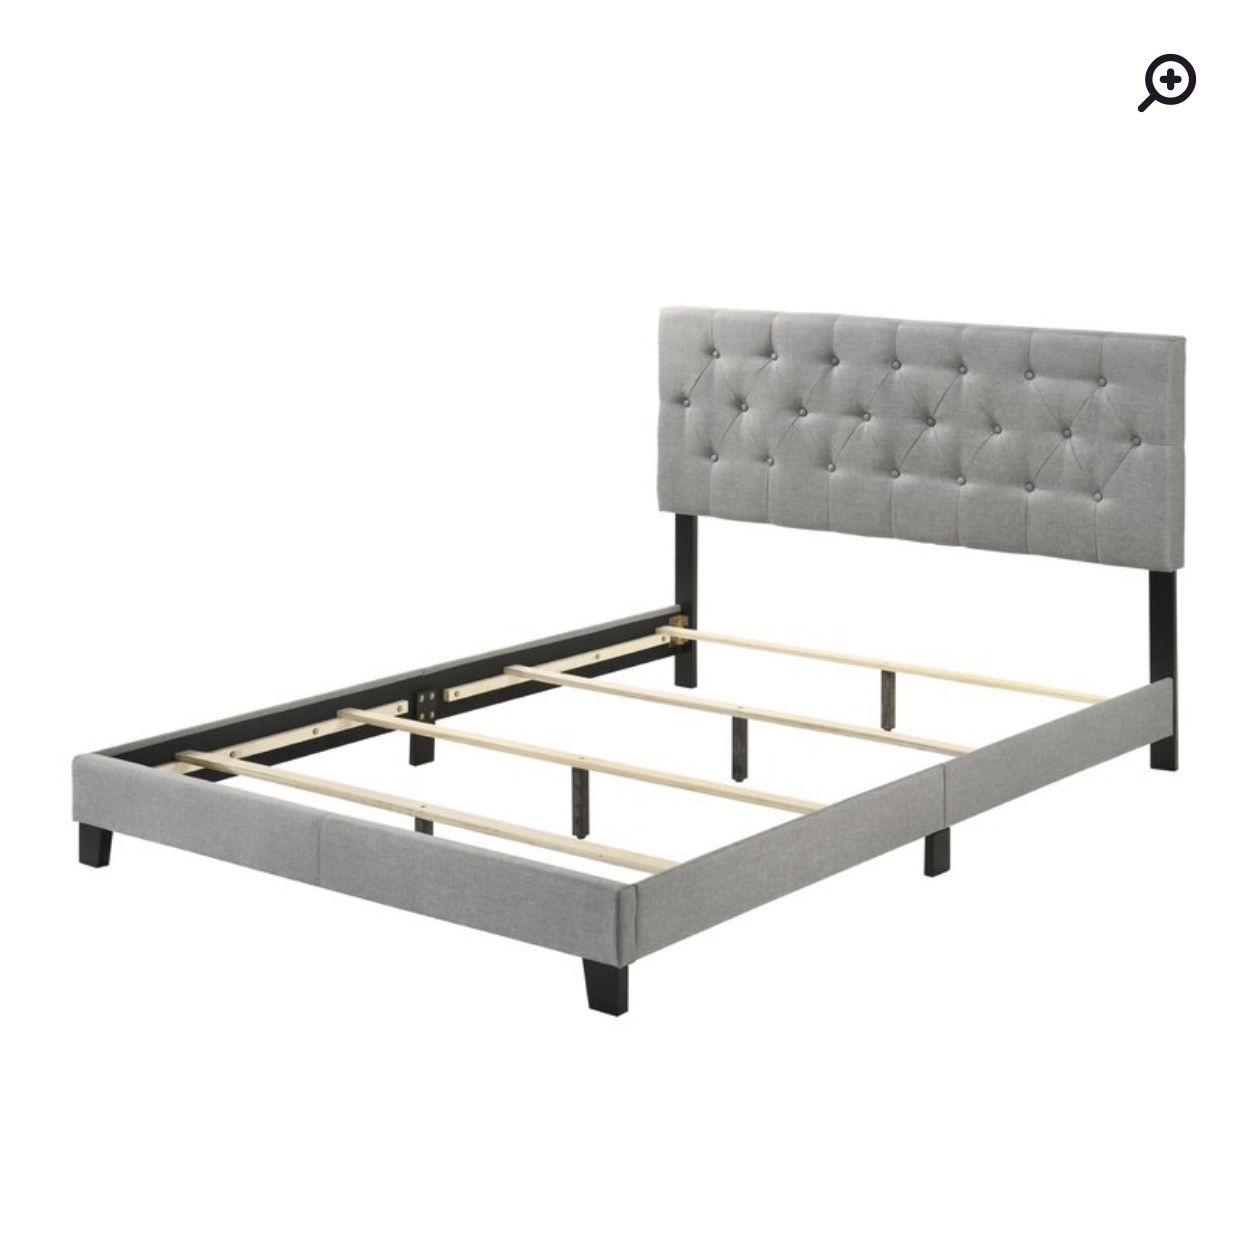 Twin size bed frame brand new in box